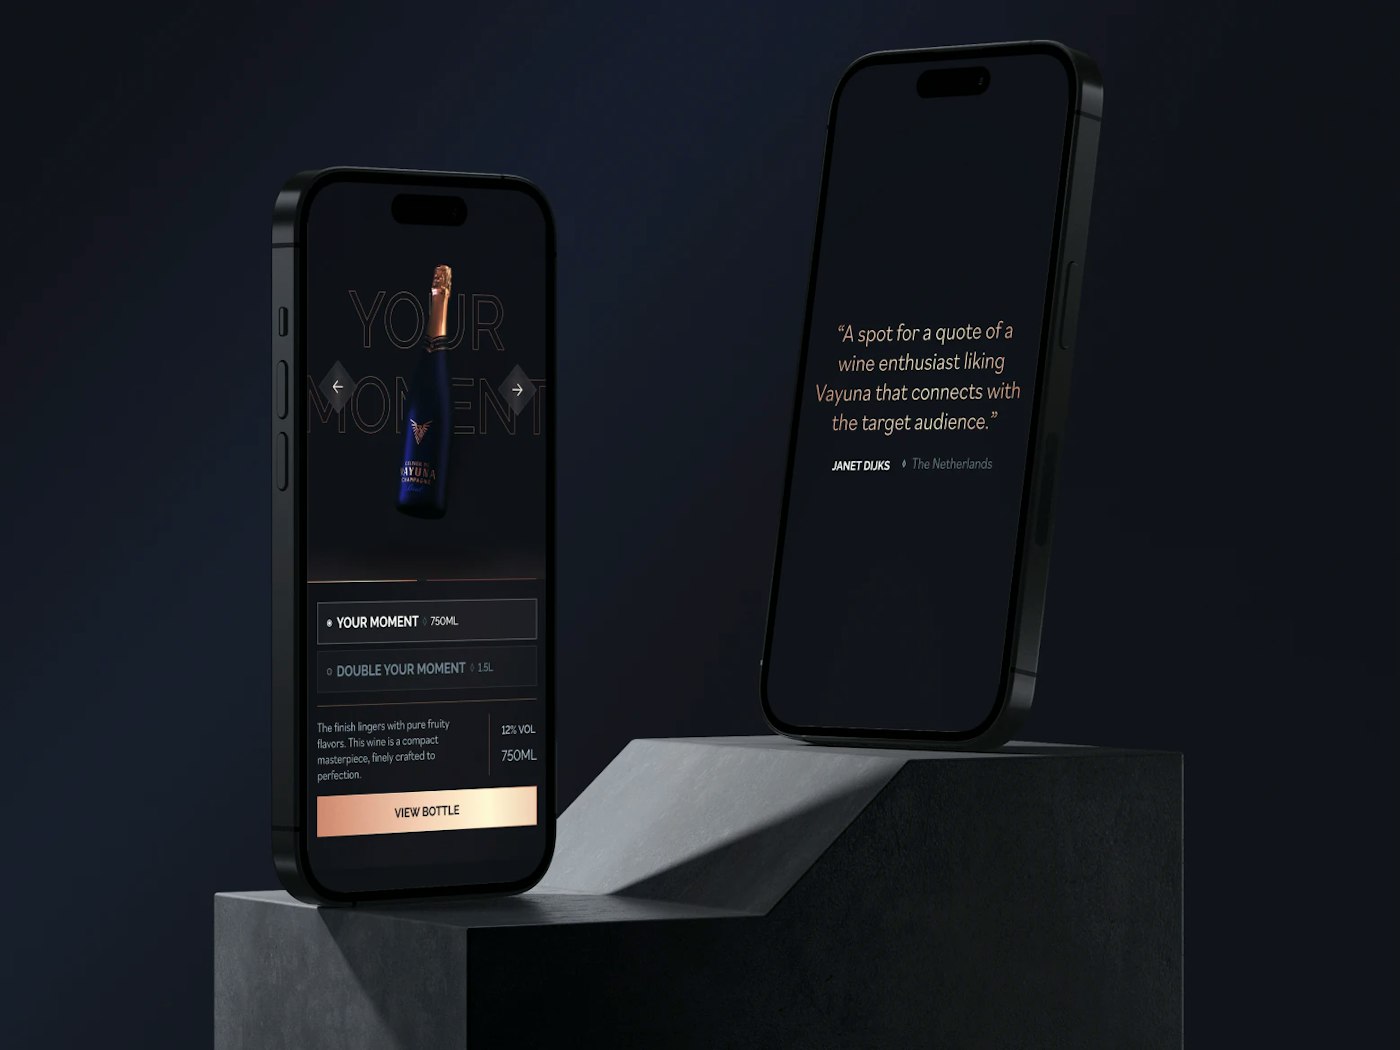 Two smartphones on display, one showing a mobile app interface for VAYUNA Champagne with product selection, and the other featuring a customer testimonial. The phones are set against a minimalist background that highlights the sleek design of the app.